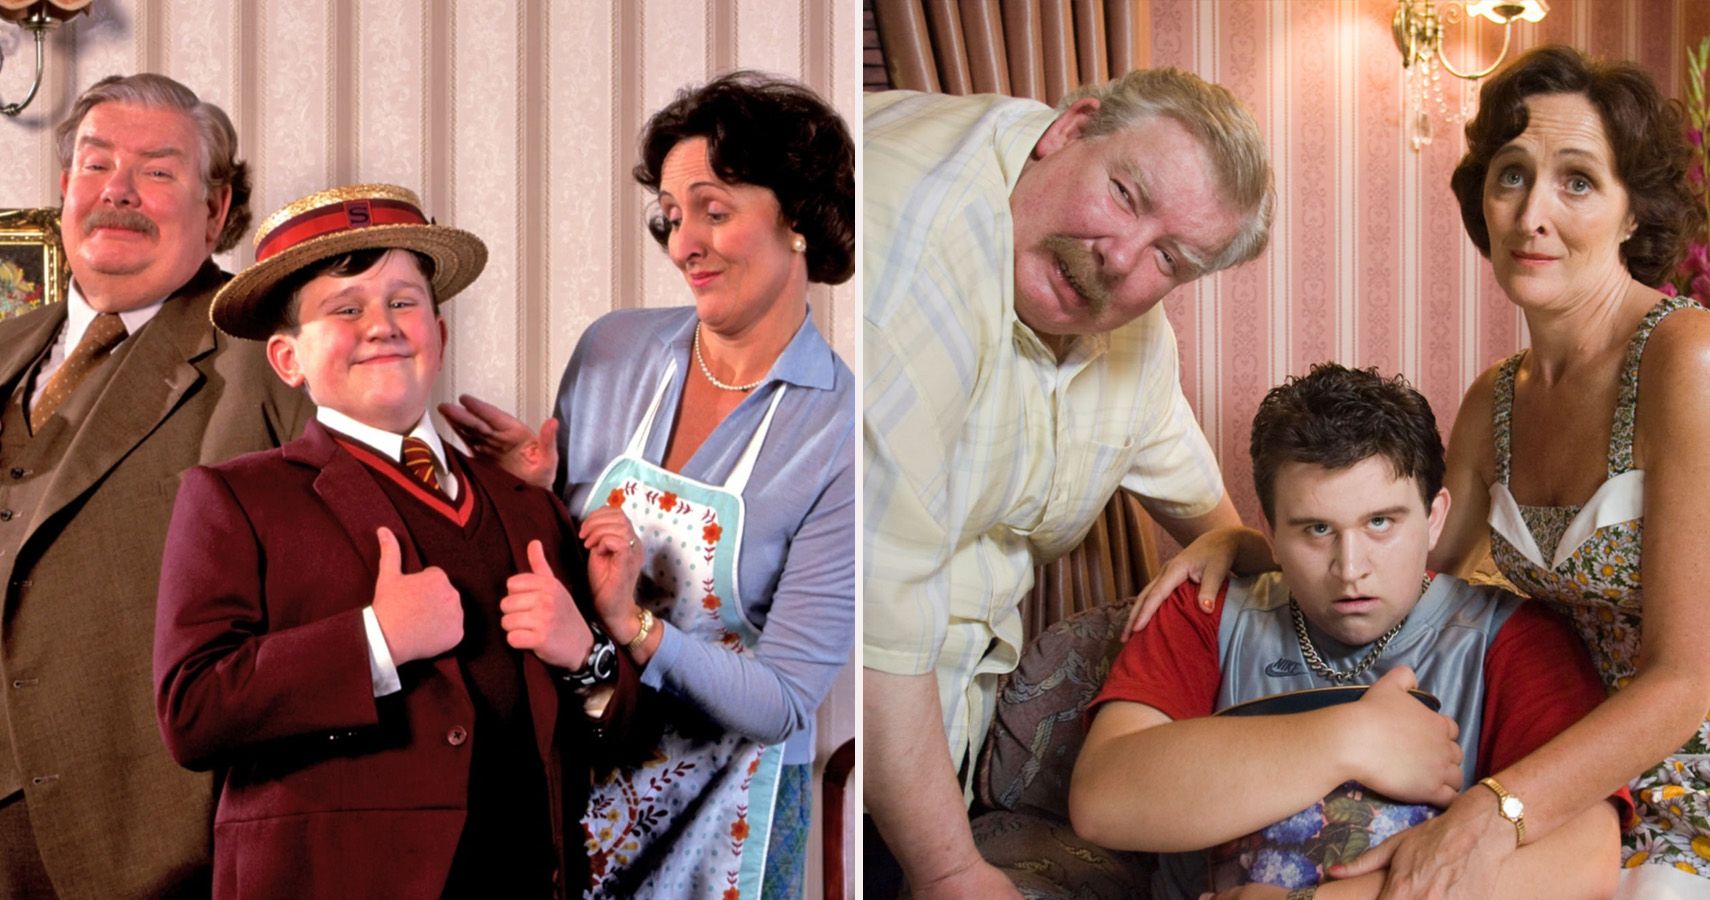 Harry Potter: 10 Biggest Ways The Dursleys Changed From Philosopher's